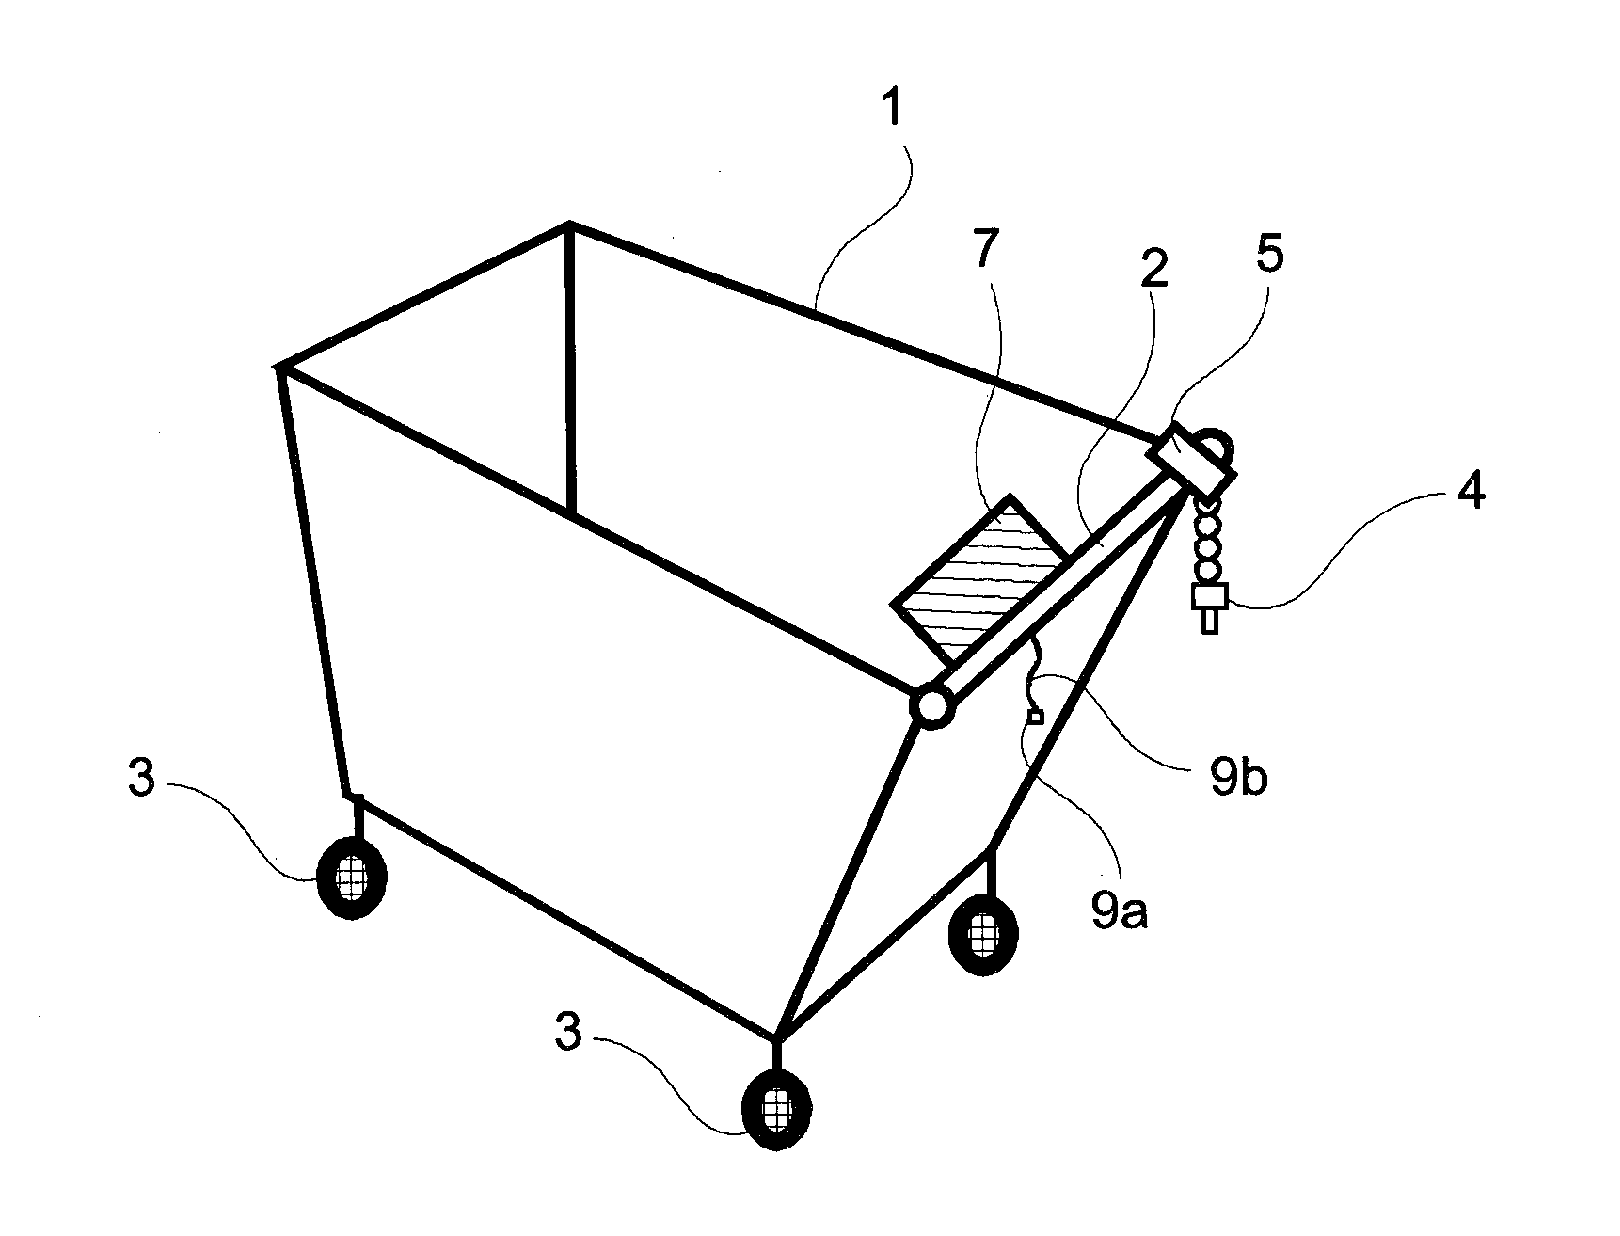 Shopping trolley with docking station and coin deposit lock